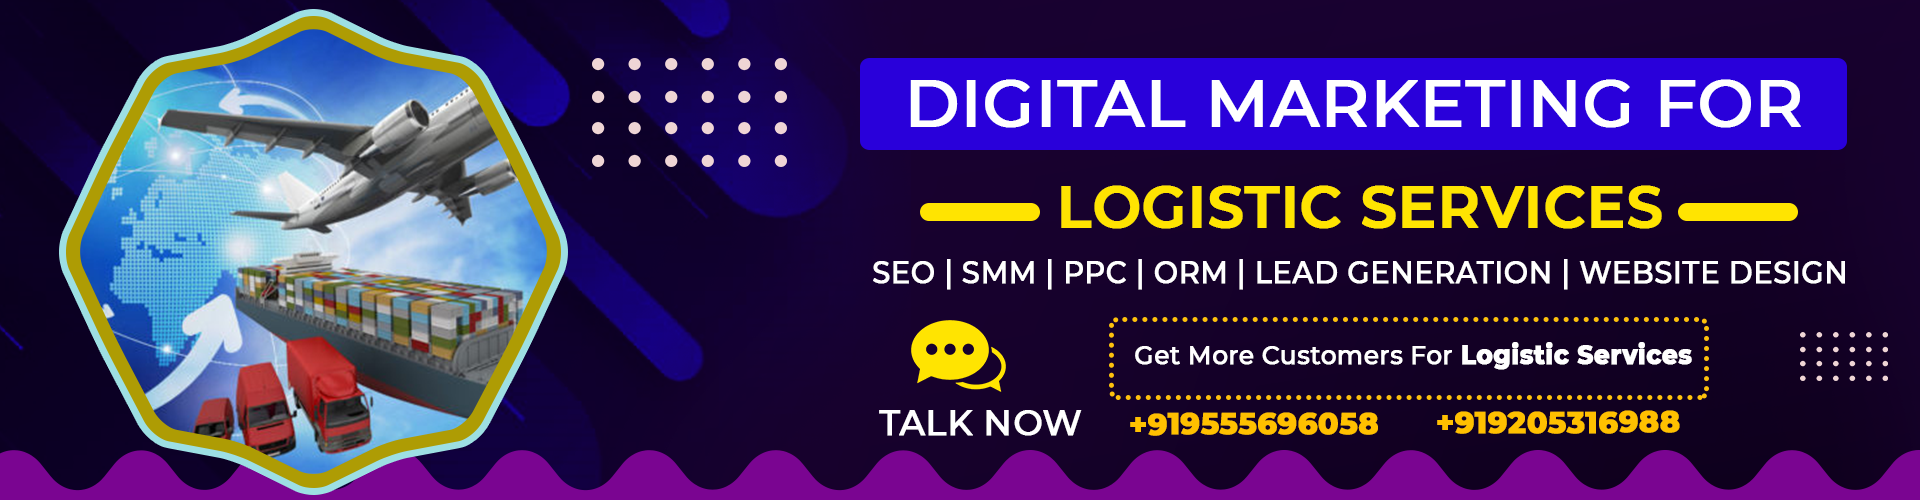 digital-marketing-for-logistic-services